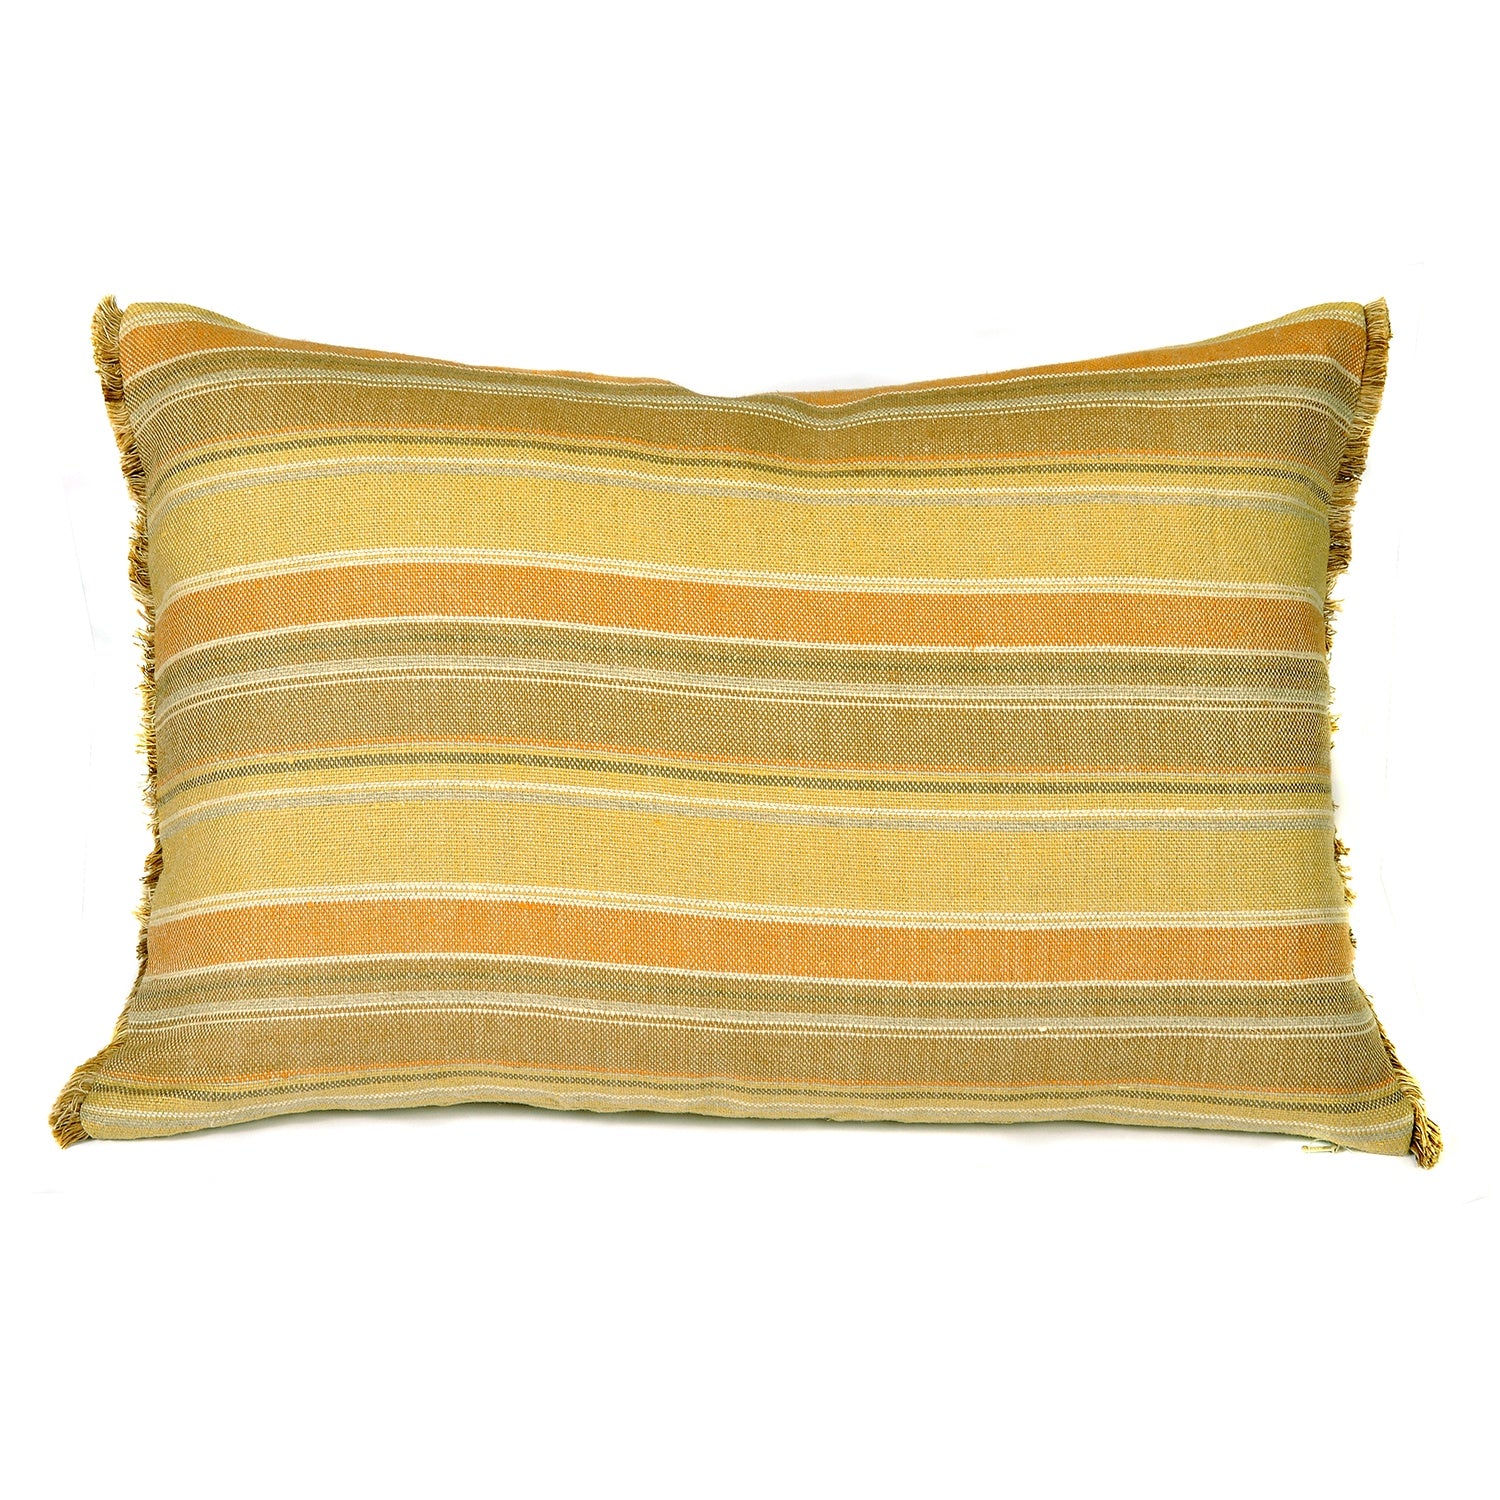 Mustard and Brick Striped Linen Cushion with Fringe Joanna Wood Shop